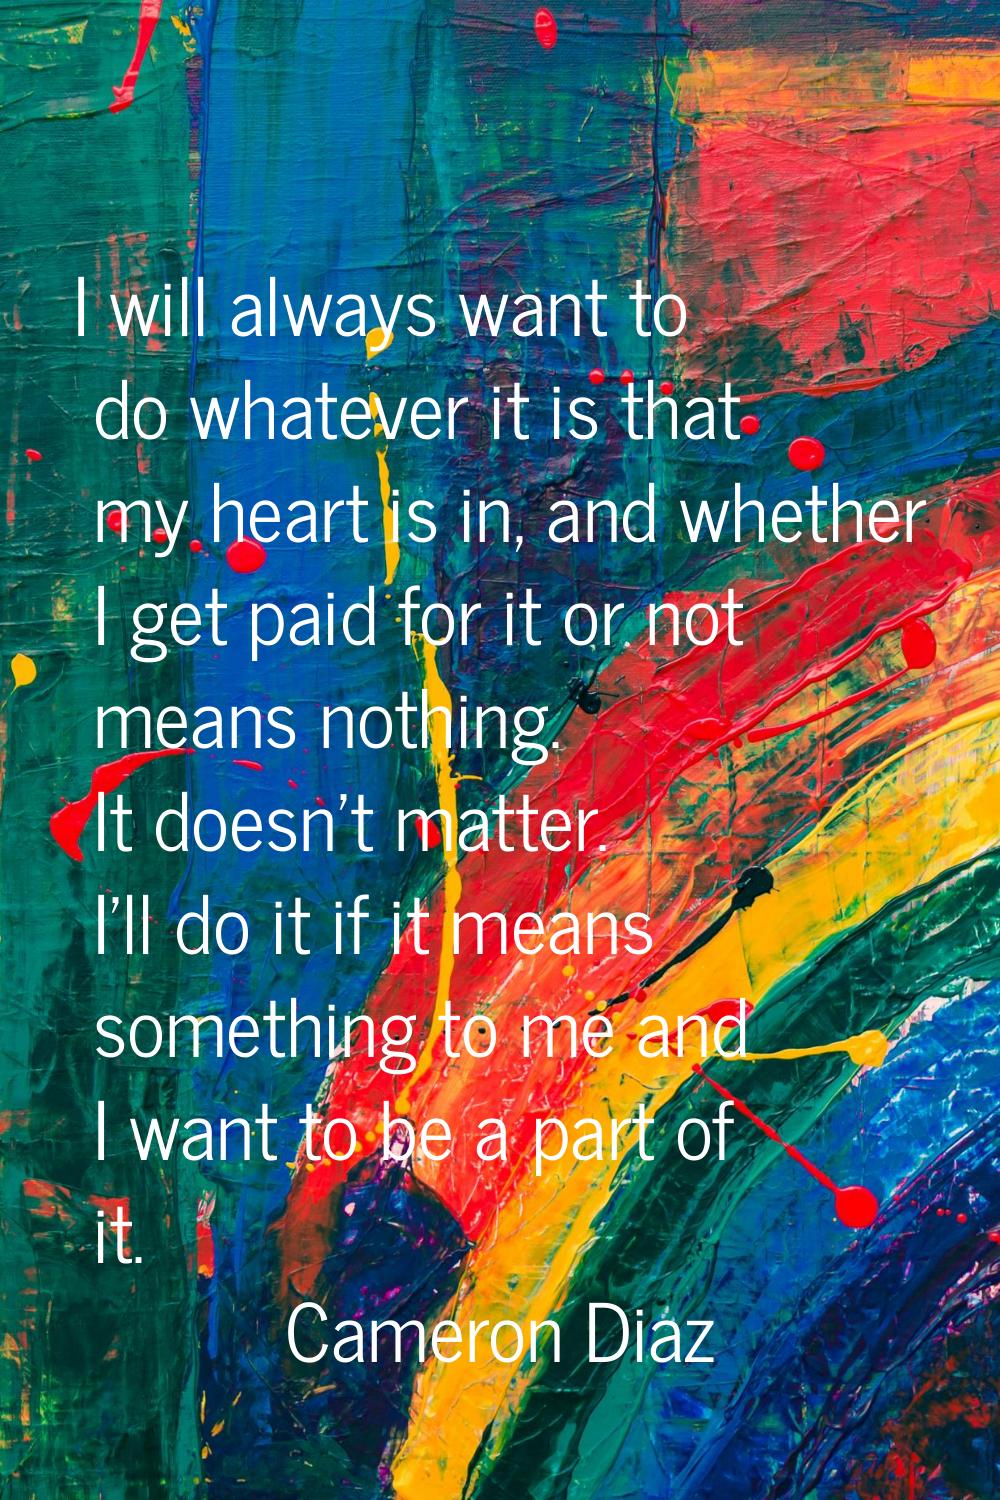 I will always want to do whatever it is that my heart is in, and whether I get paid for it or not m